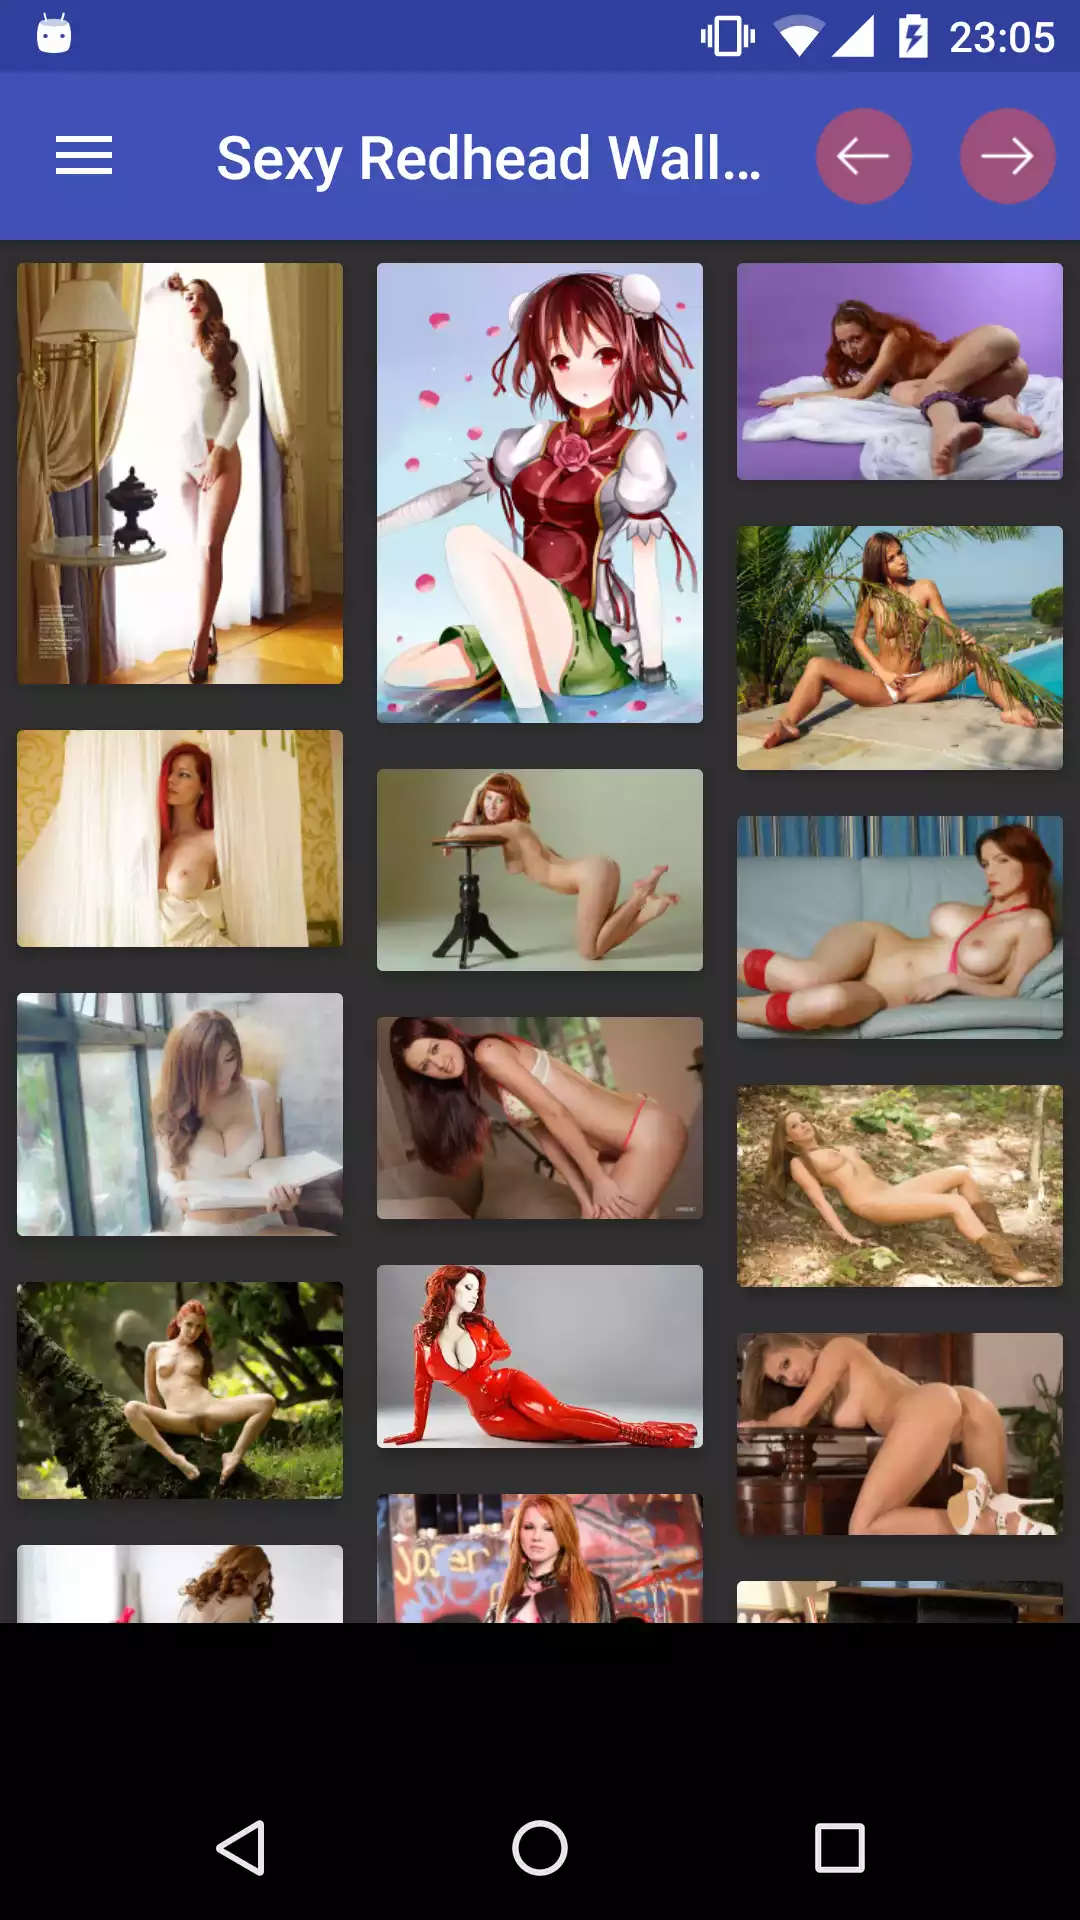 Sexy Redhead wallpapers redhead,sexy,erotic,pornstars,pictures,pron,apk,pornstar,app,pics,hentai,pic,lane,lily,best,wallpaper,kristinf,backgrounds,android,photo,apps,hot,amateur,adult,free,wallpapers